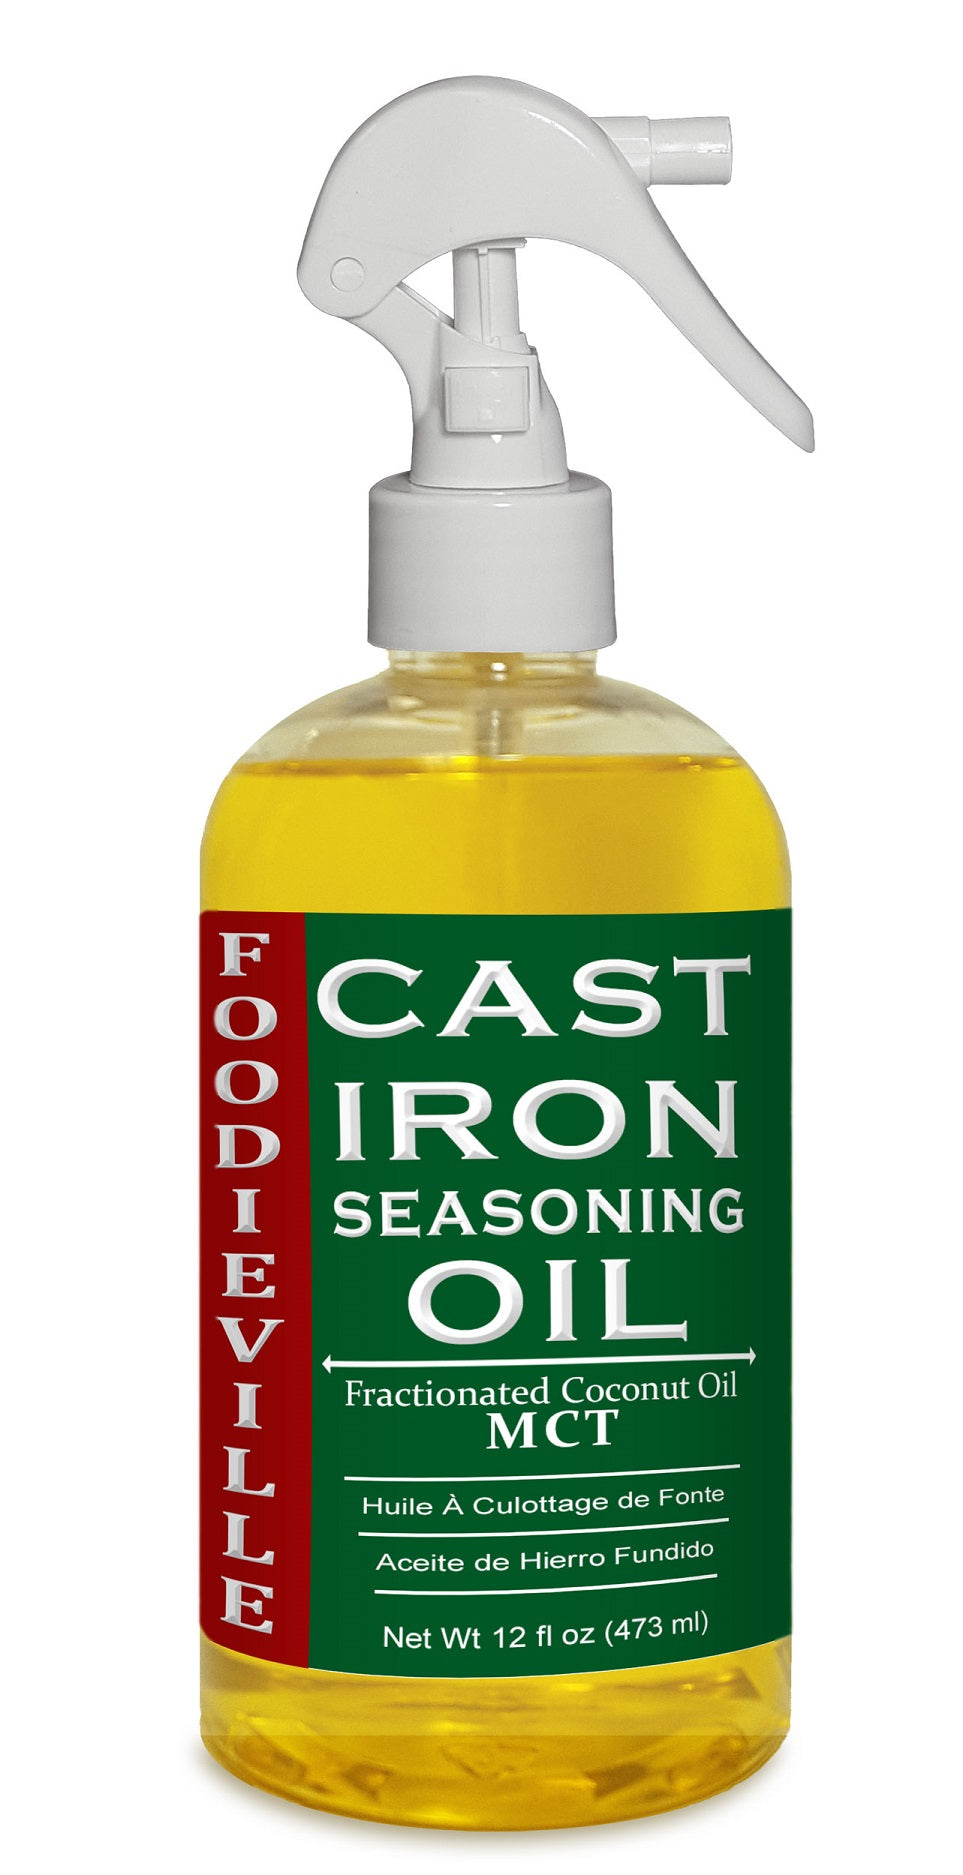 Indus Valley launches cast iron seasoning oil in collaboration